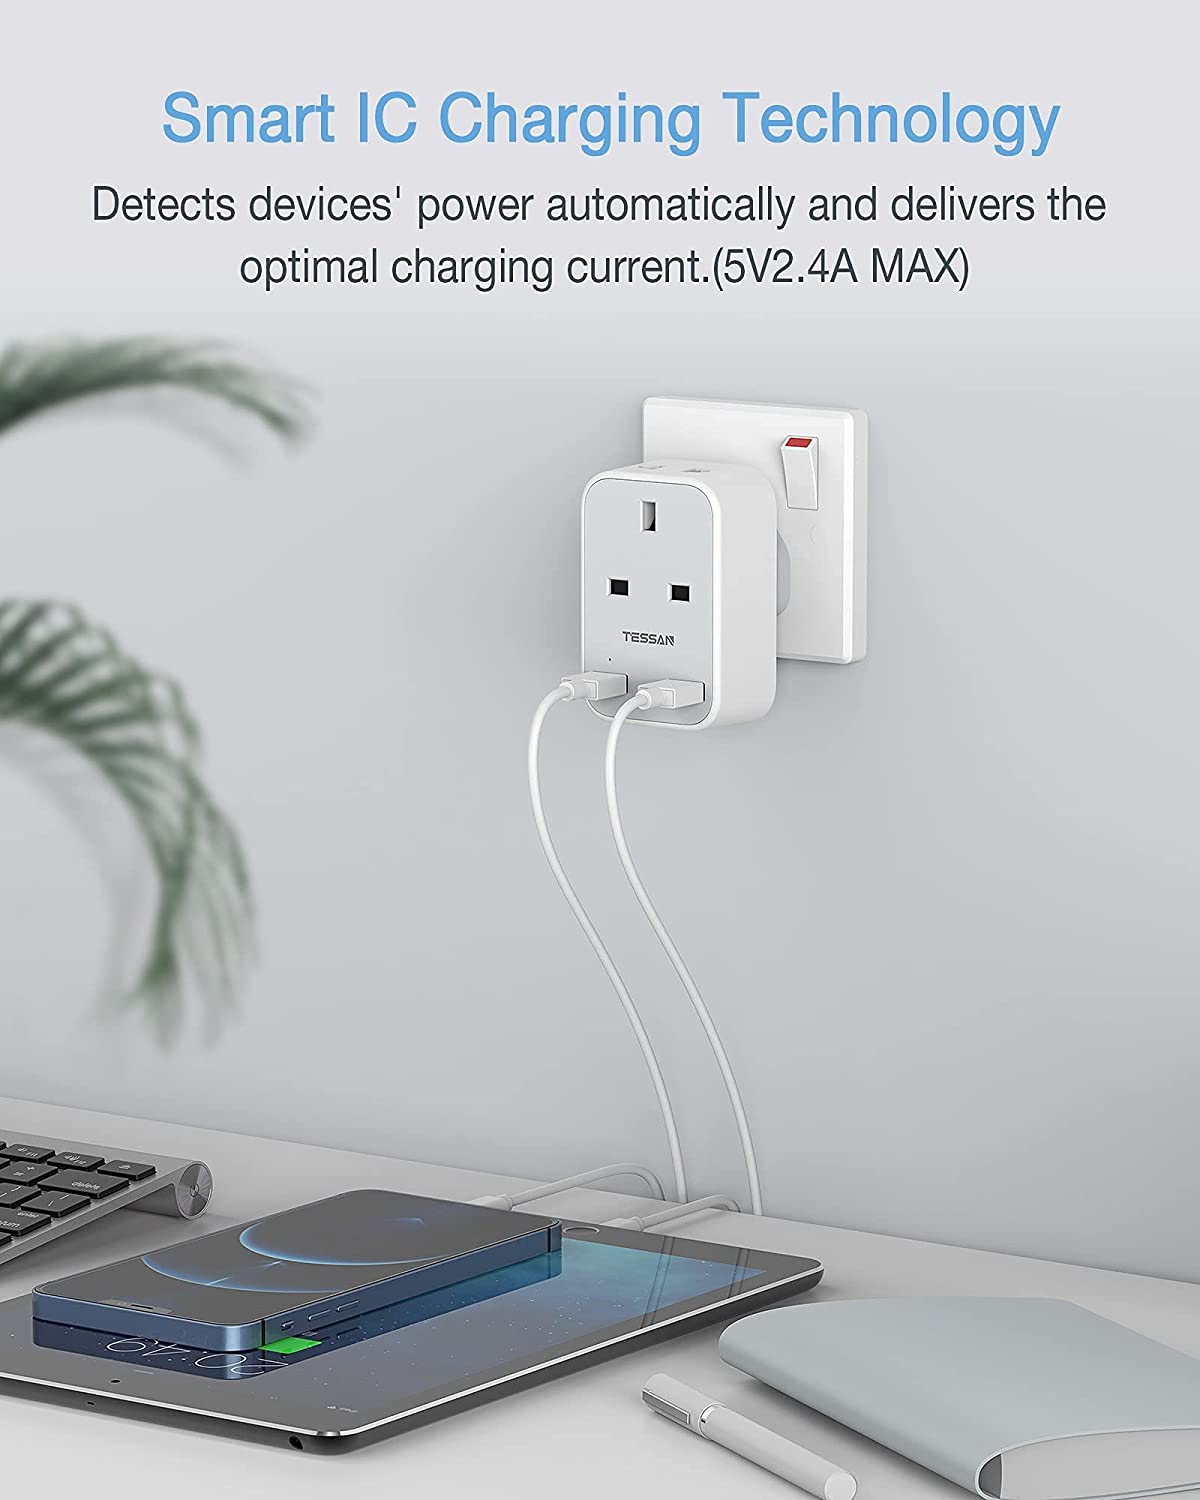 Multi Travel Plug Adapter With 2 USB Charging Ports